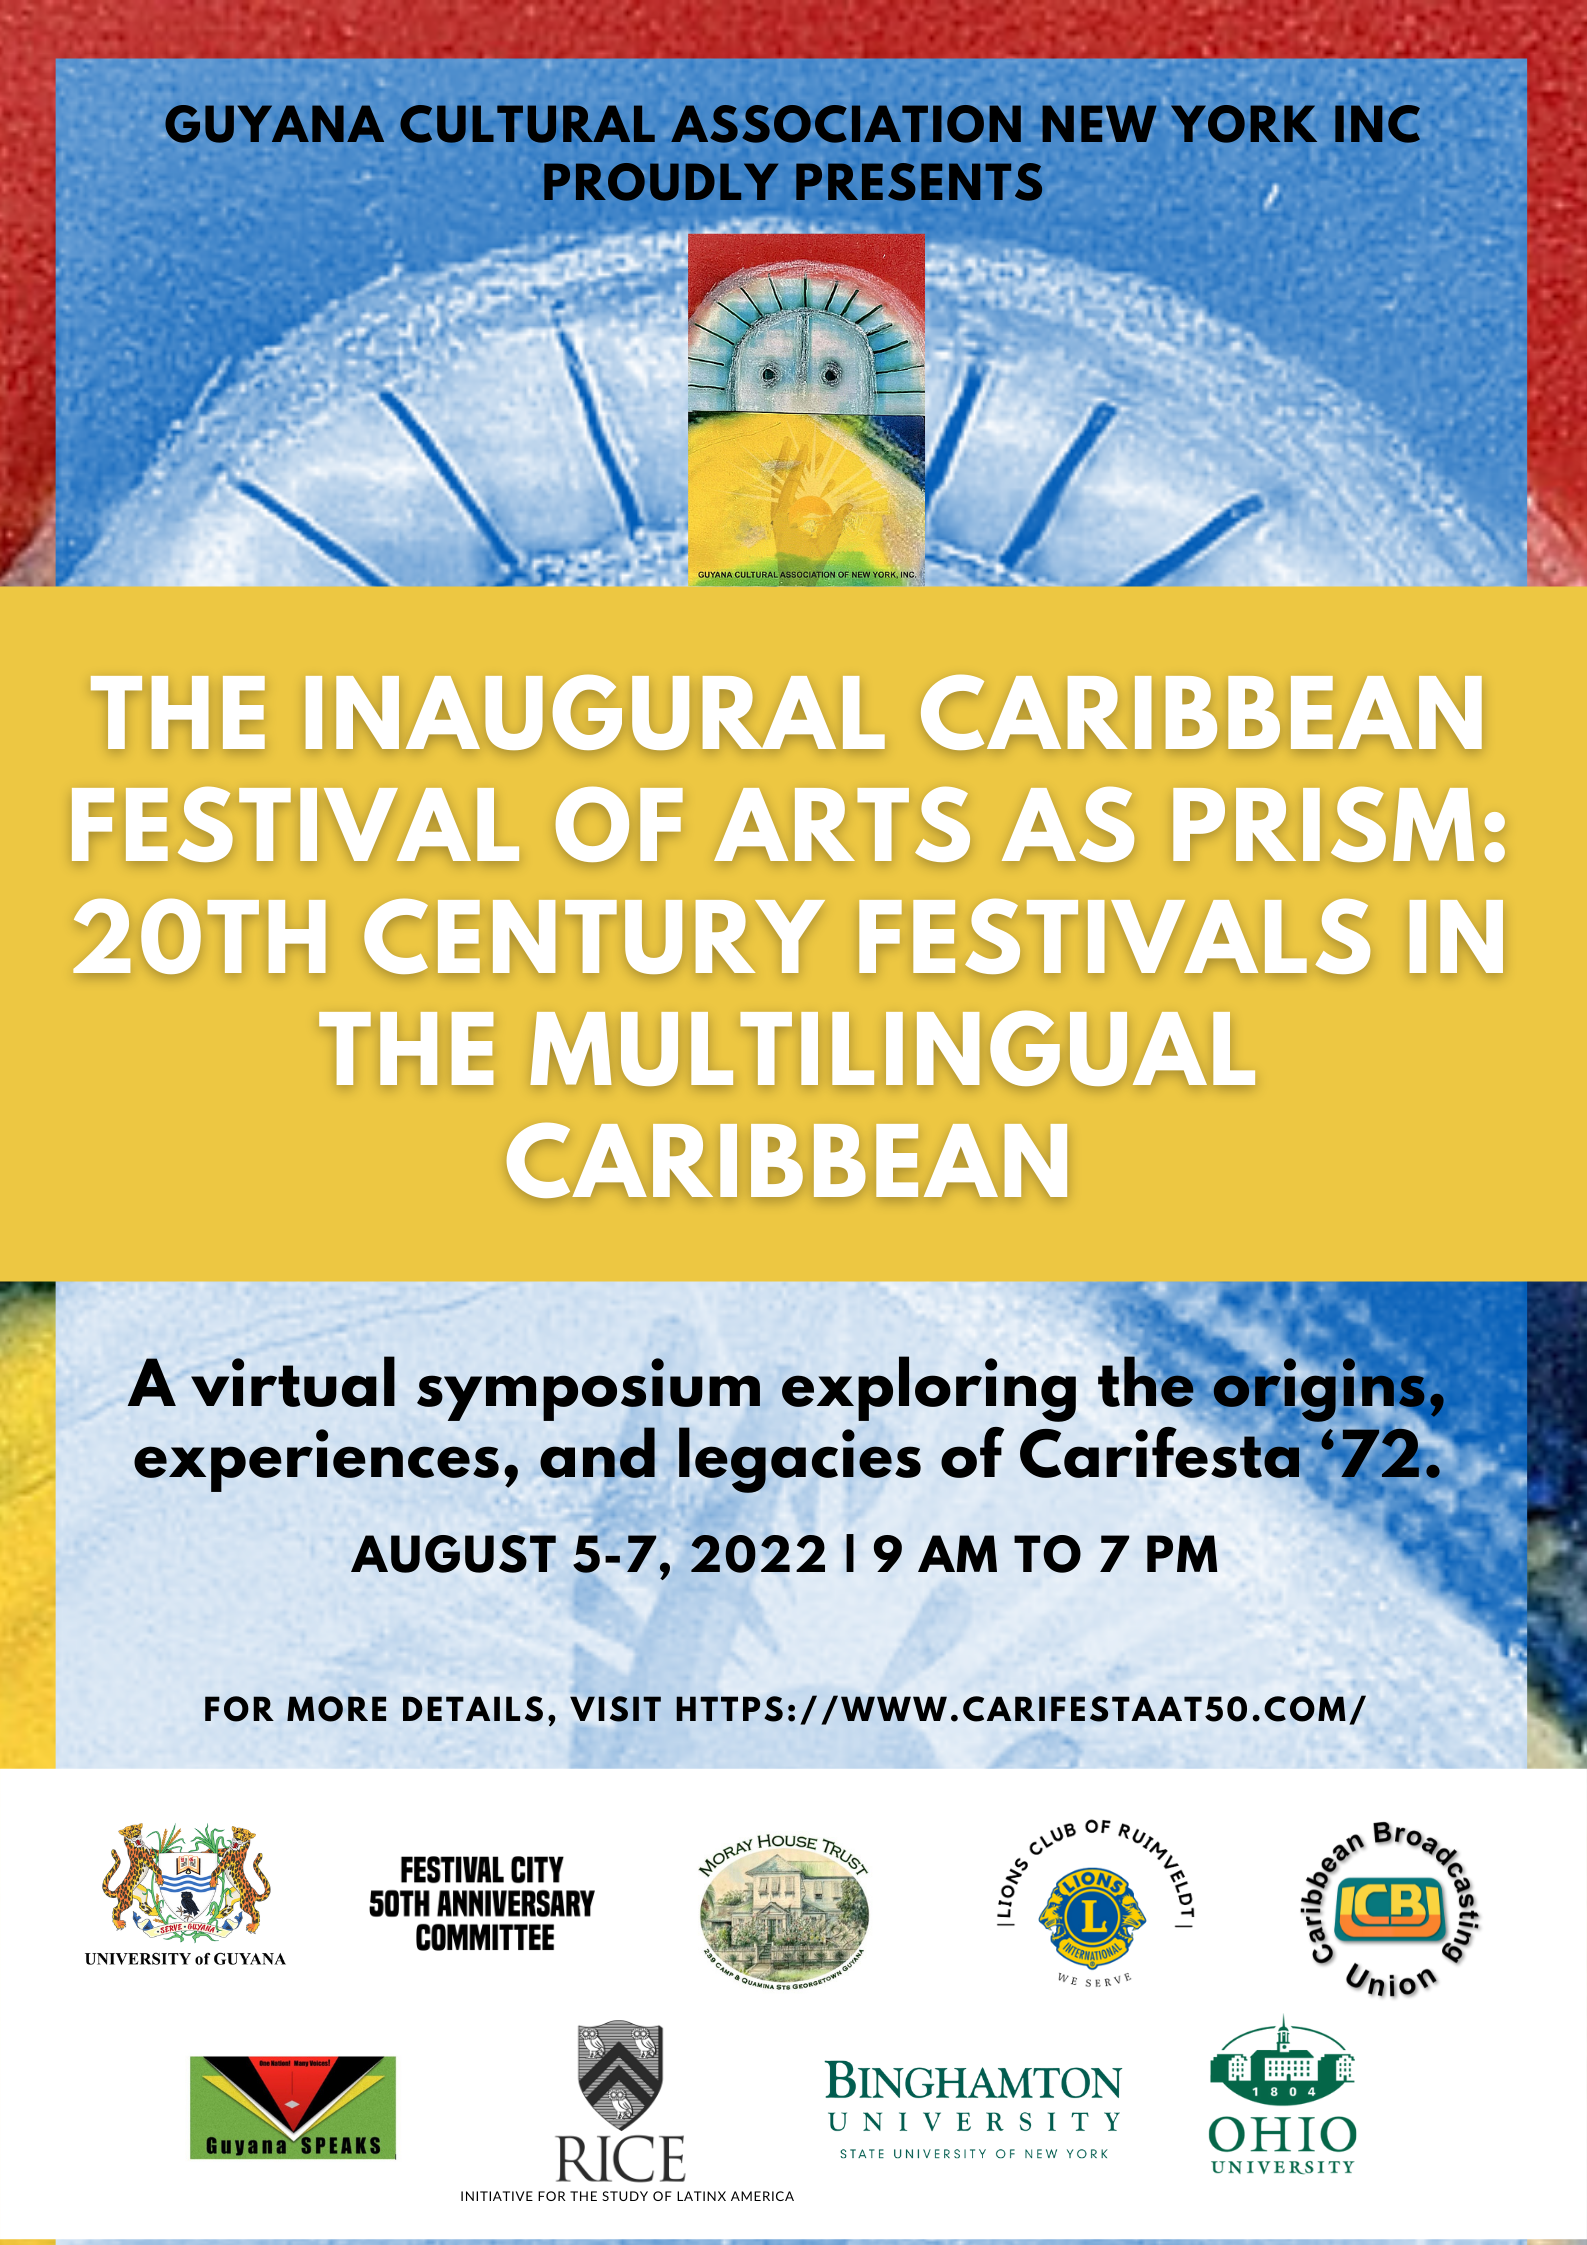 "The Inaugural Caribbean Festival of Arts as Prism: 20th Century Festivals in the Multilingual Caribbean"  Poster